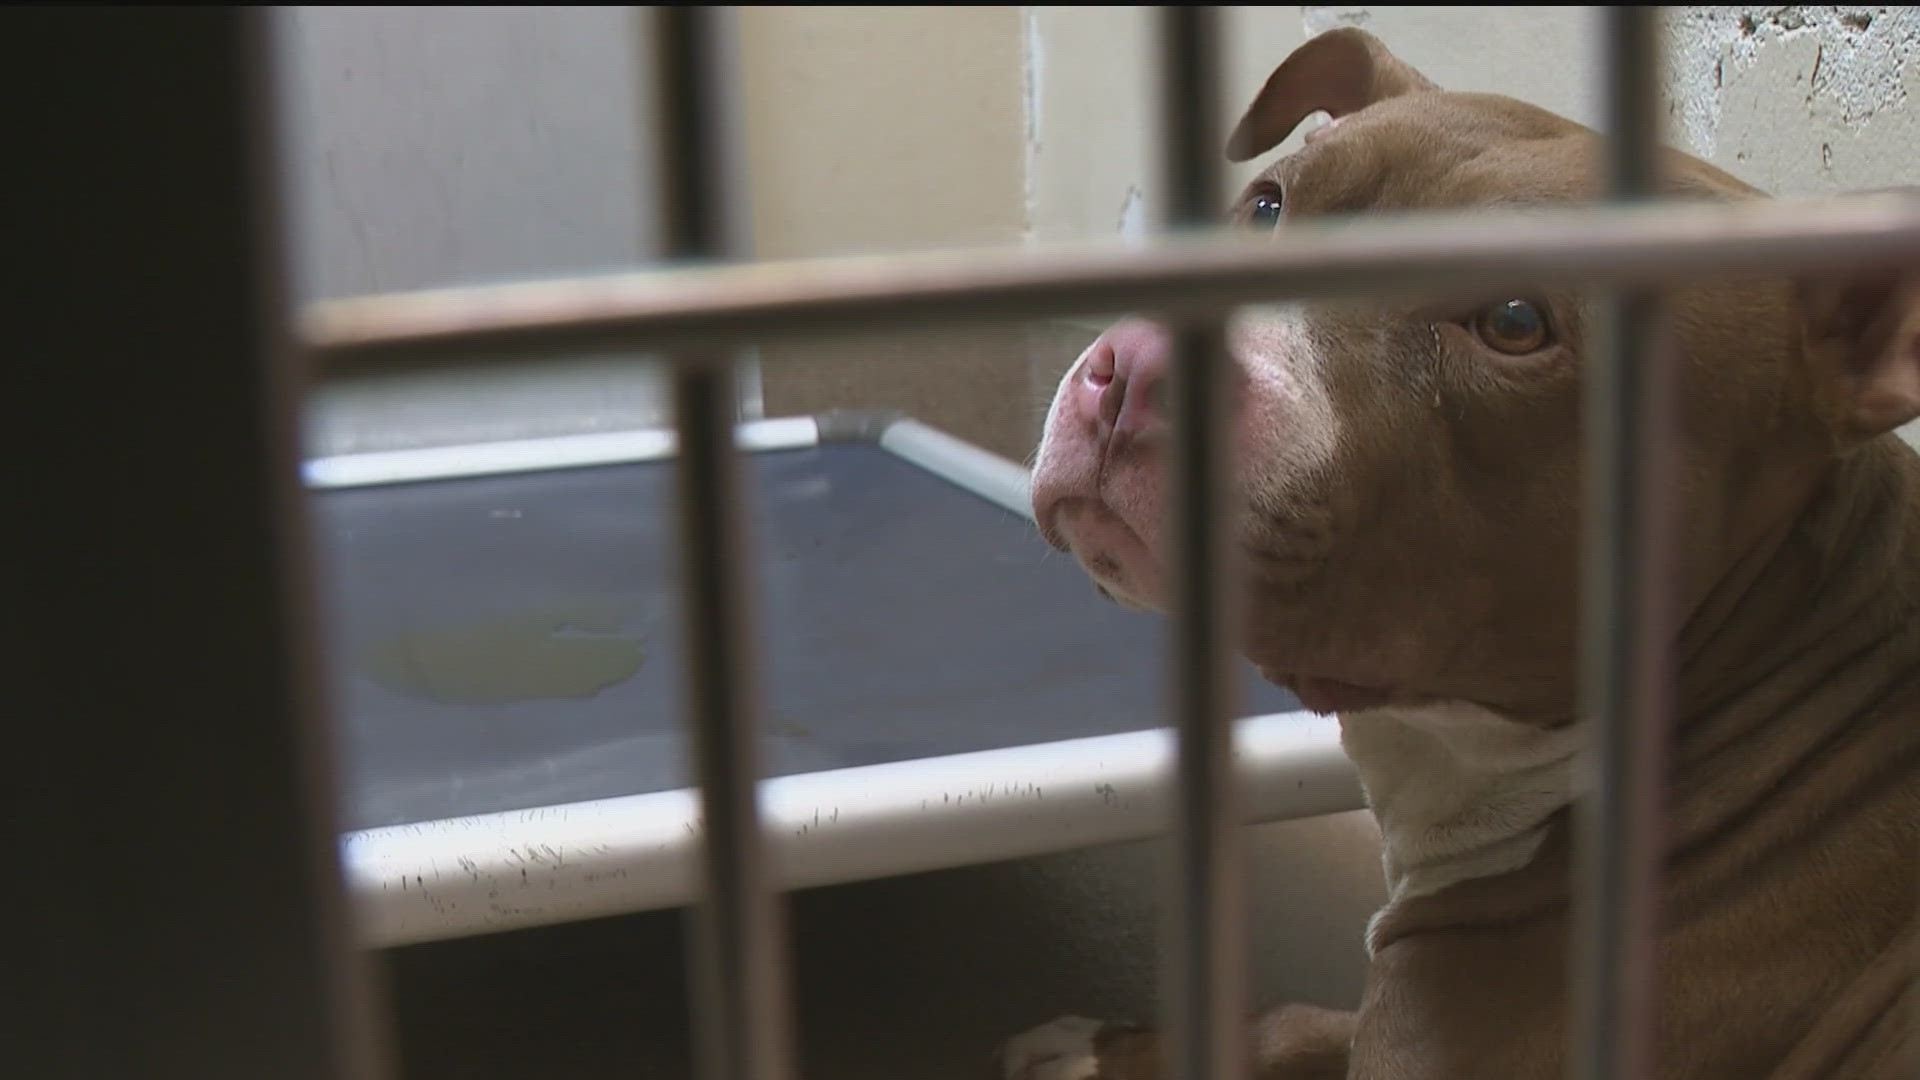 Commissioners recently passed legislation to help move court-held animals through the system and out of shelters.